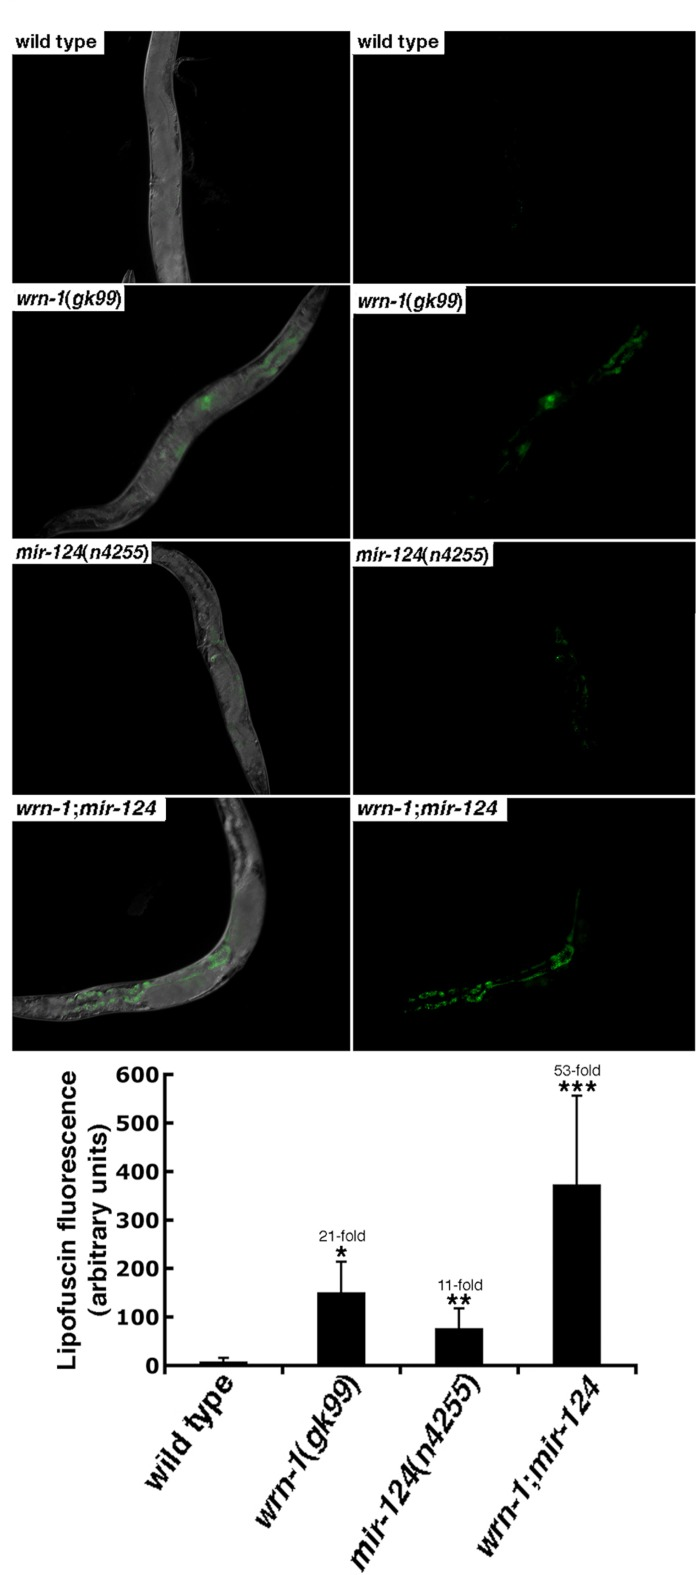 The aging marker lipofuscin is increased in mutant C. elegans strains. Representative photographs of wild type (N2), wrn-1(gk99), mir-124(n4255), and wrn-1;mir-124 double mutant worms at three days into adulthood. Panels on the right represent the lipofuscin autofluorescence alone. All pictures were taken at the same exposure time. Magnification is 10 X. The histogram at the bottom represents the average intensity of lipofuscin autofluorescence in the different C. elegans strains. Ten to fifteen three-days old (three days into adulthood) worms of each strain were photographed and the fluorescence intensity was quantified using Adobe Photoshop. The fold increase in fluorescence intensity compared to wild type animals is indicated. (Unpaired Student's t-test; *P = 0.00002 for wrn-1(gk99) vs. wild type; **P = 0.00222 for mir-124(n4255) vs. wild type; and ***P = 0.00078 for wrn-1;mir-124 vs. wild type).